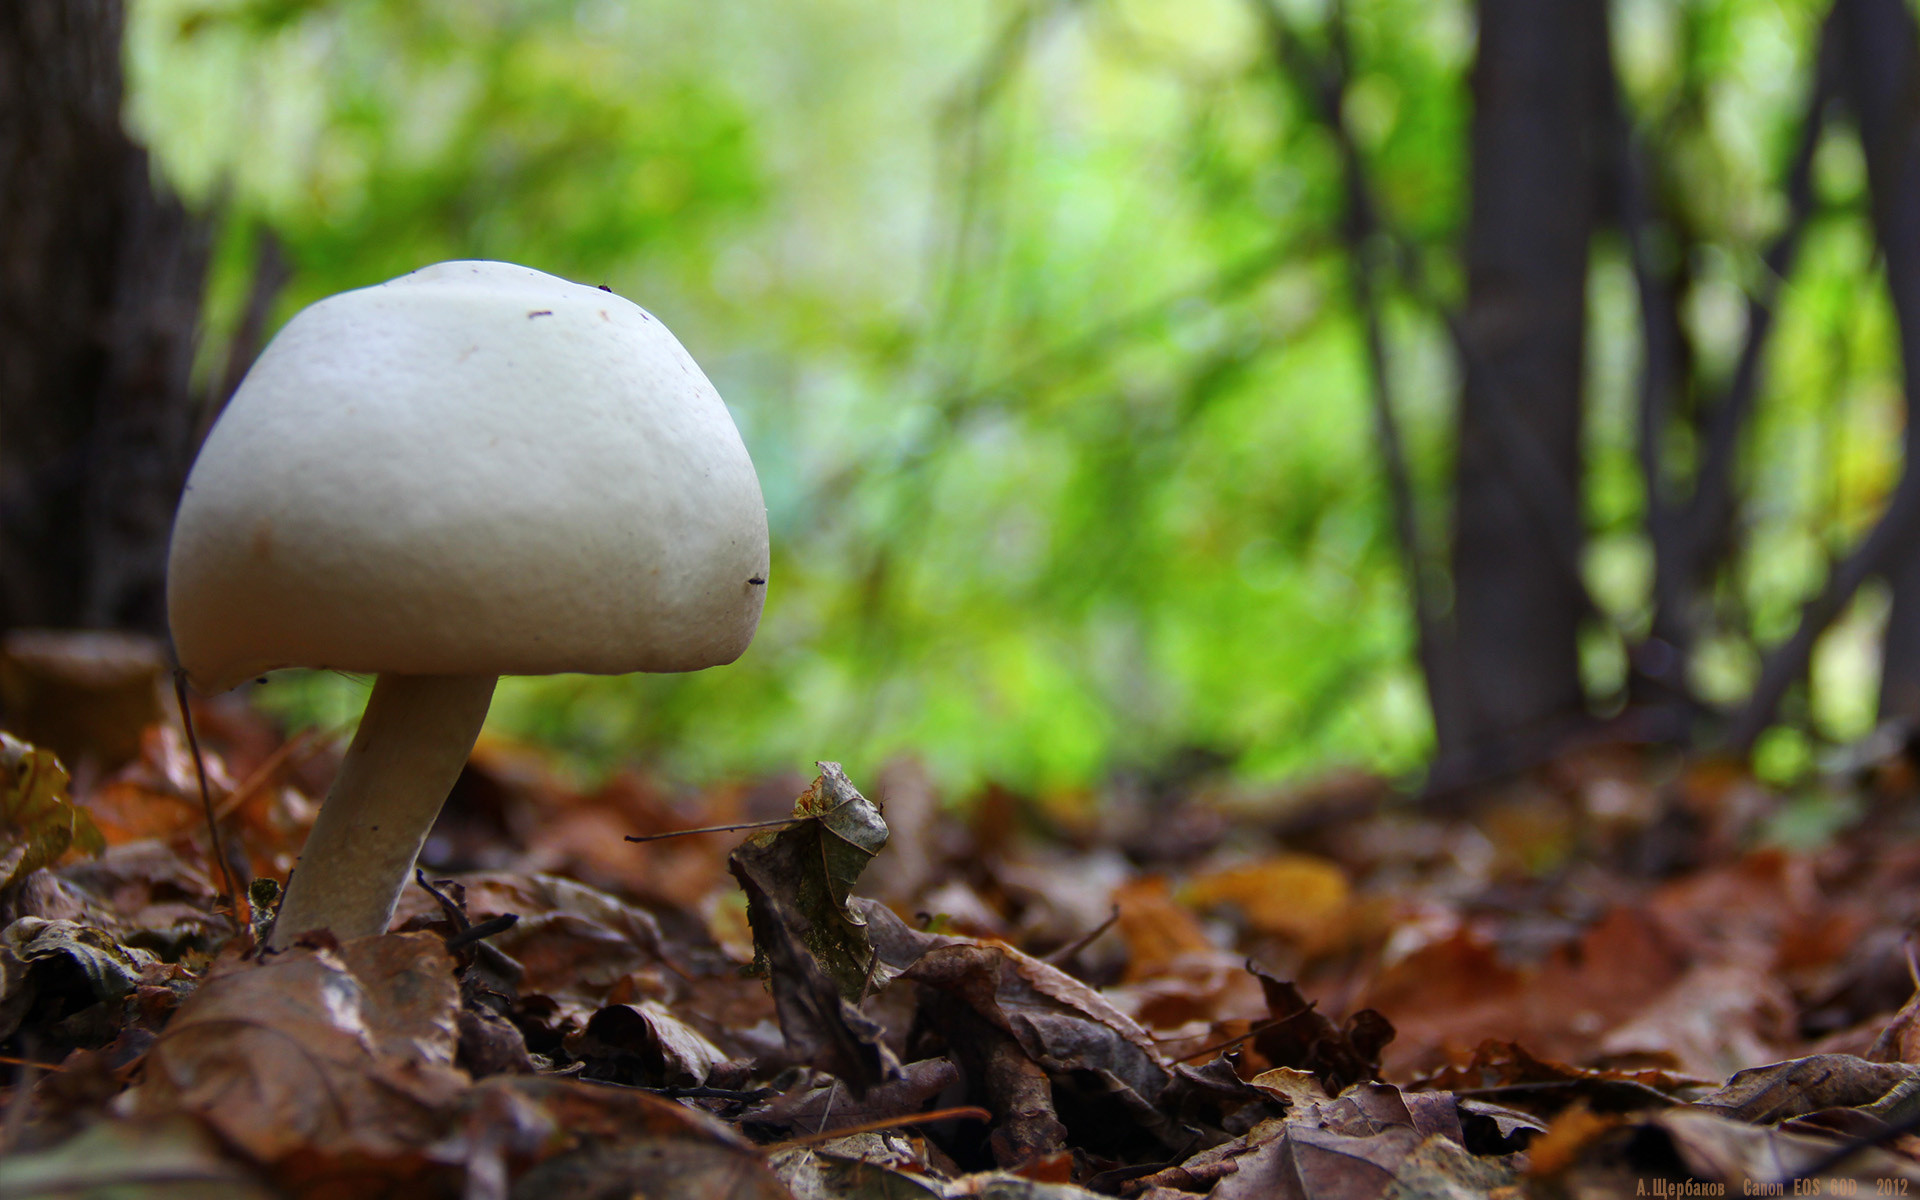 1920x1200 White mushroom in the forest wallpapers and images - wallpapers, pictures,  photos